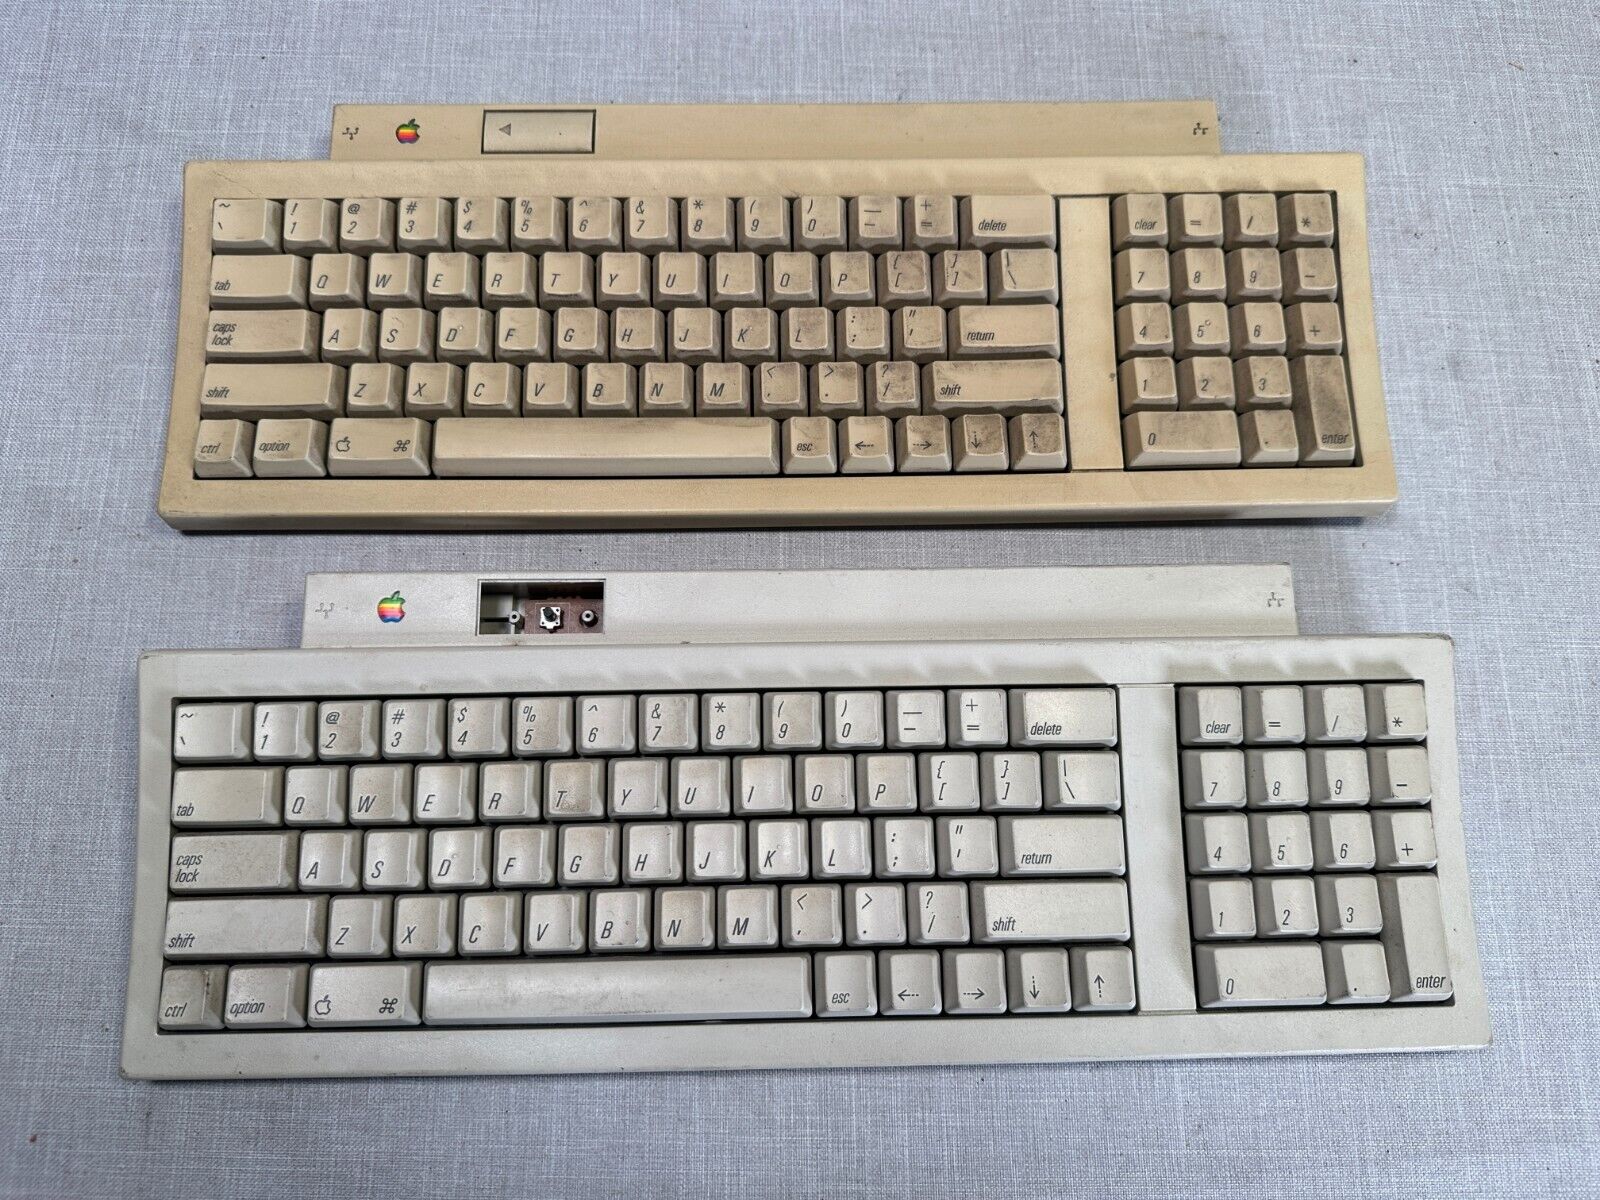 Lot of 2 Vintage Apple Keyboard II M0487 - Very Dirty and Dusty - For Parts